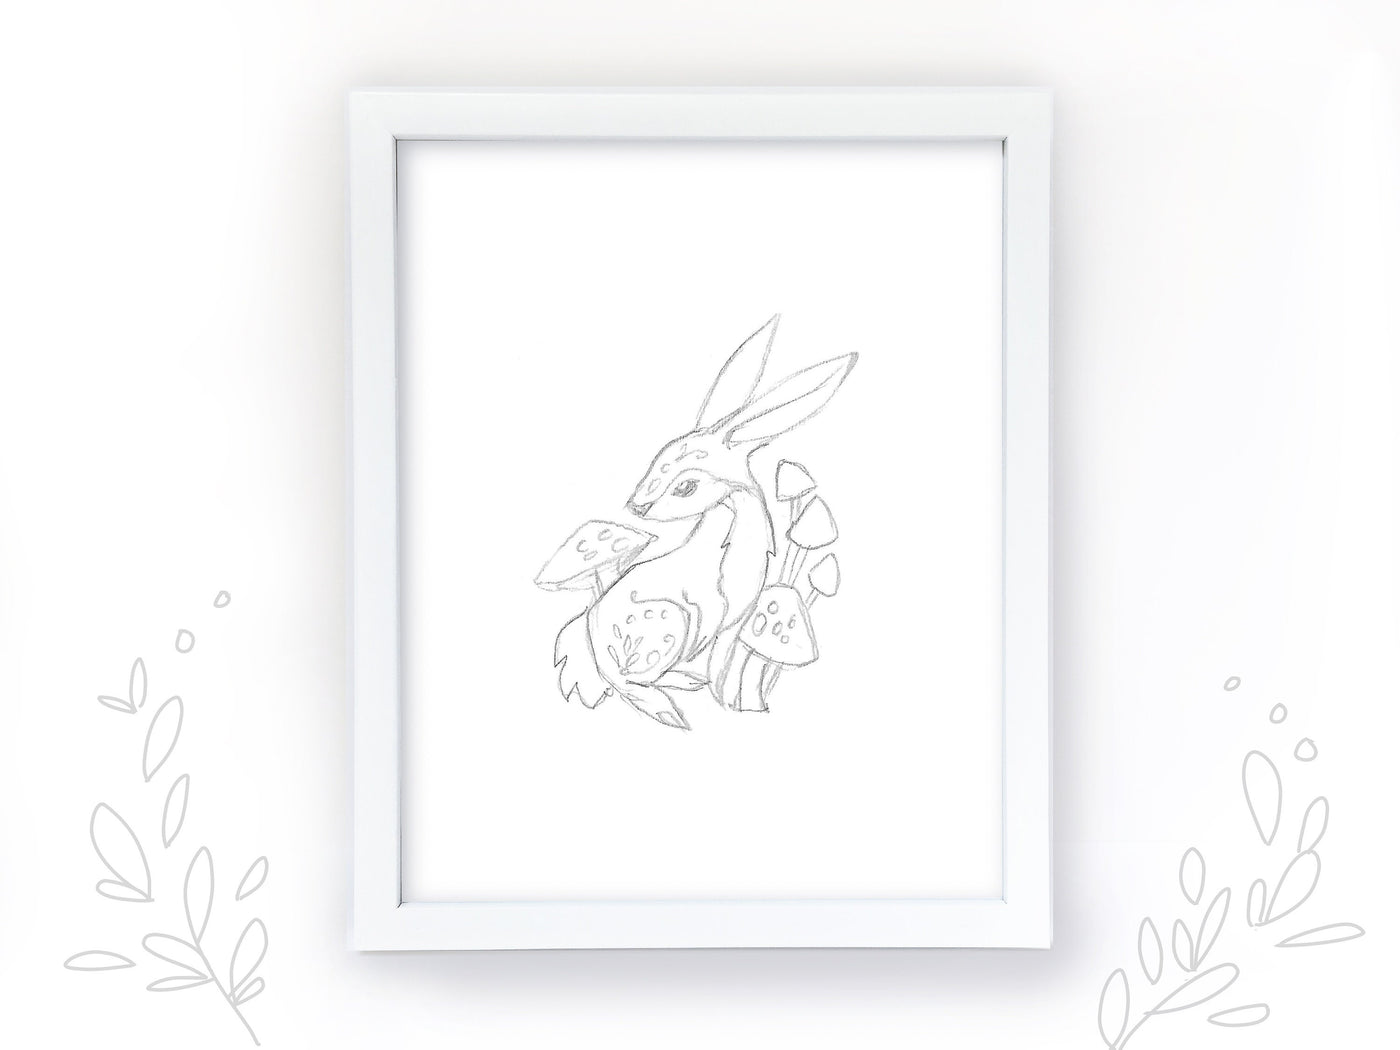 Greenwich Rabbit and Mouse Drawing Drawing by Susannah Weiland | Saatchi Art